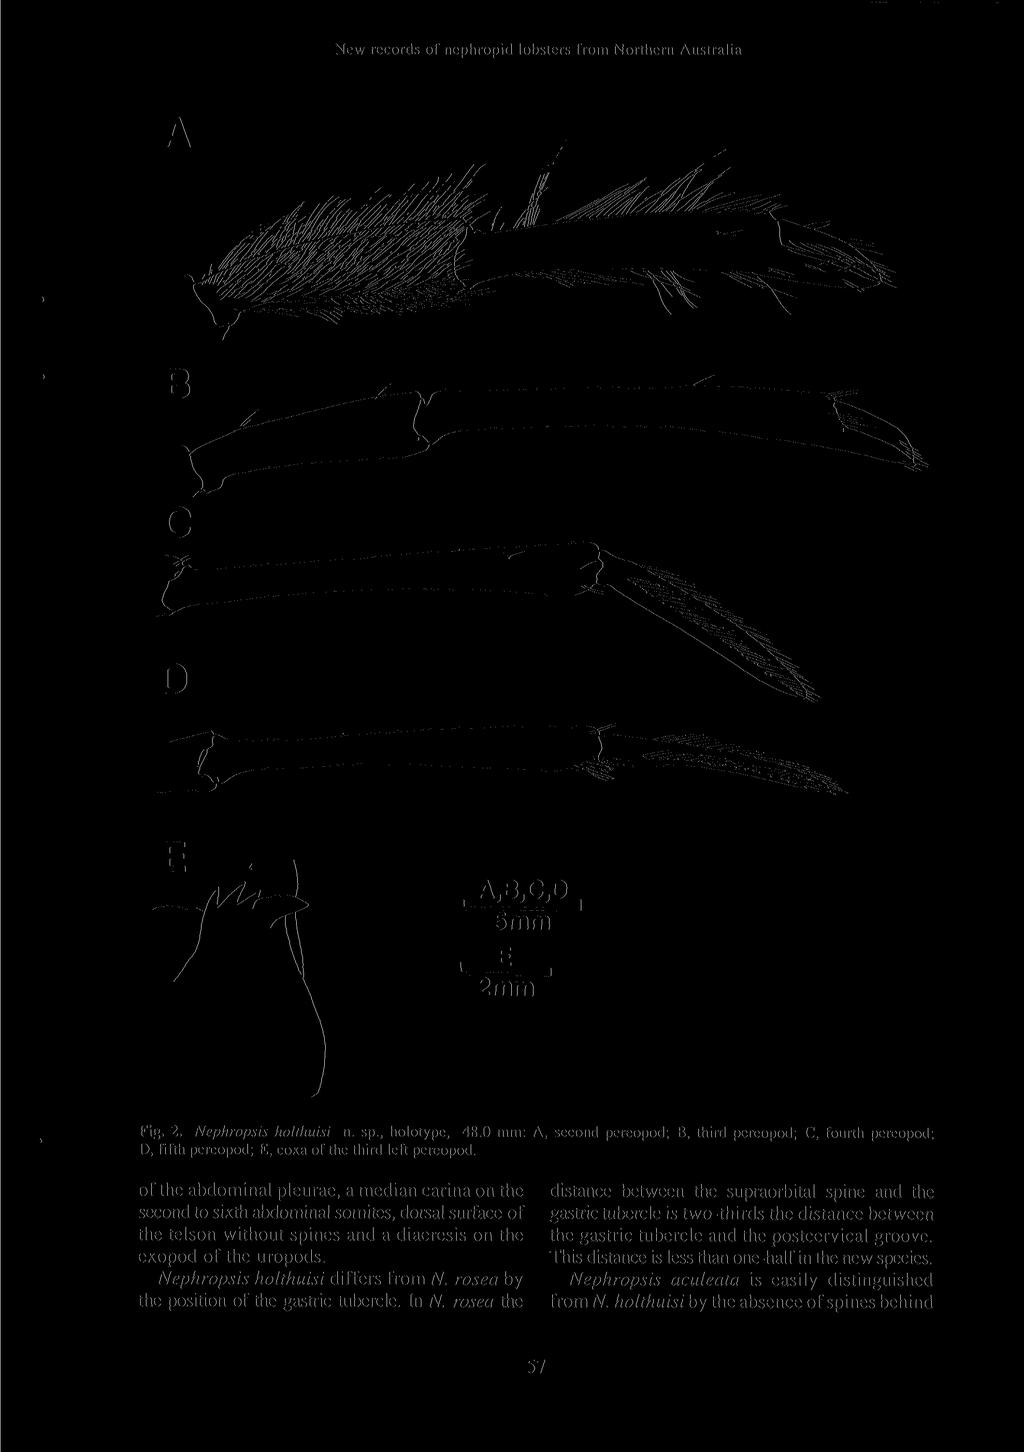 New records of nephropid lobsters from Northern Australia i ' : i 5mm E 2mm, Fig. 2. Nephropsis holthuisi n. sp., holotype, 48.0 mm: D, fifth pereopod; E, coxa of the third left pereopod.